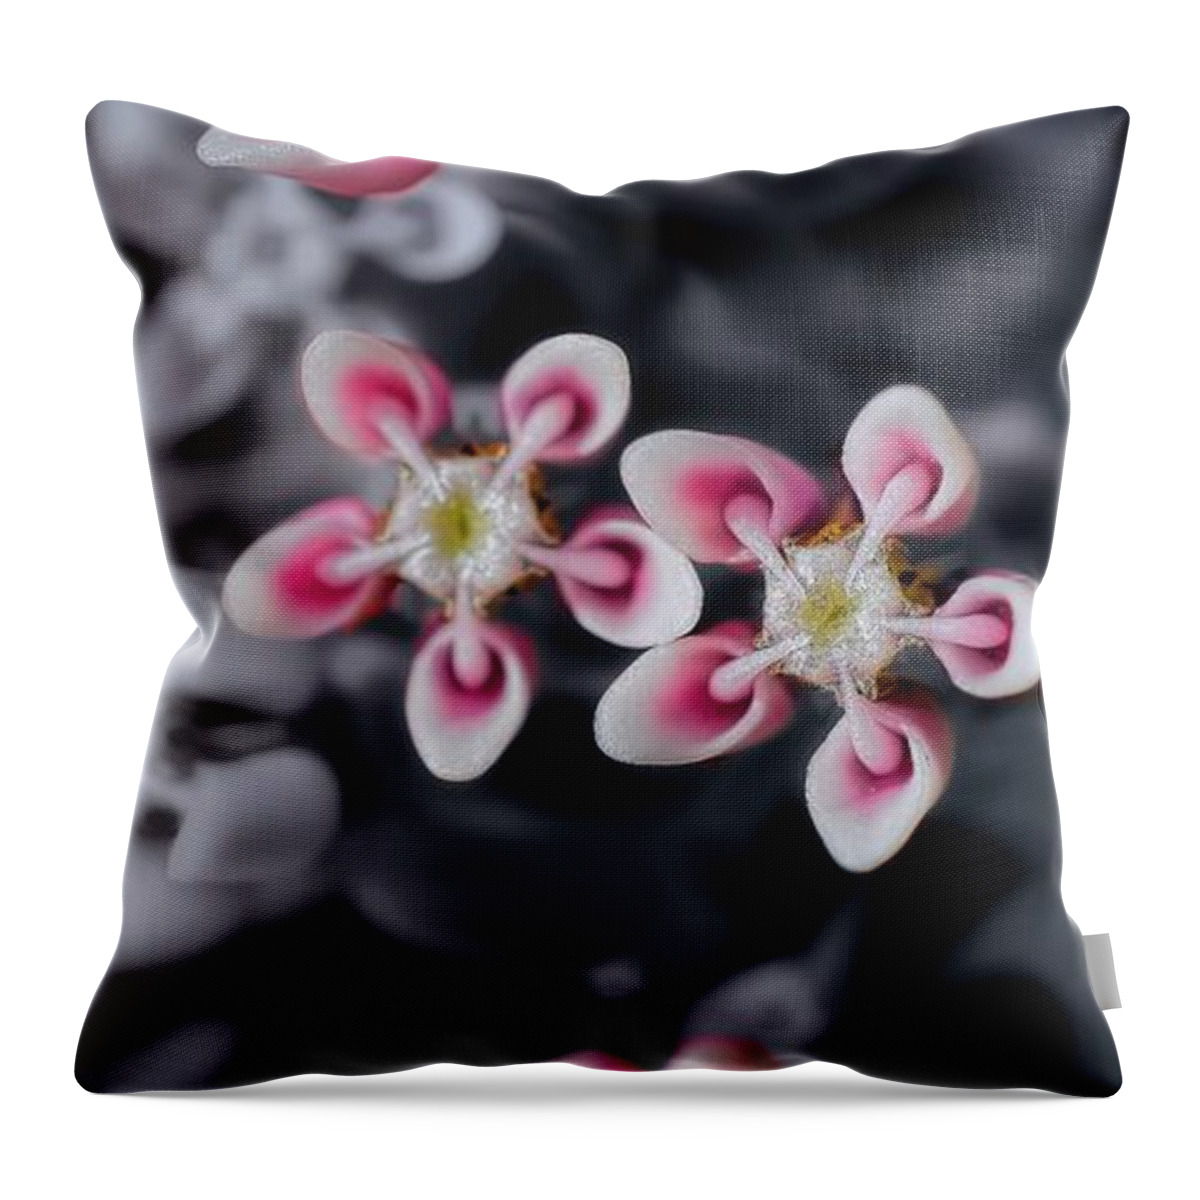 Milkweed Throw Pillow featuring the photograph Milkweed Snowflakes by Henry Kowalski